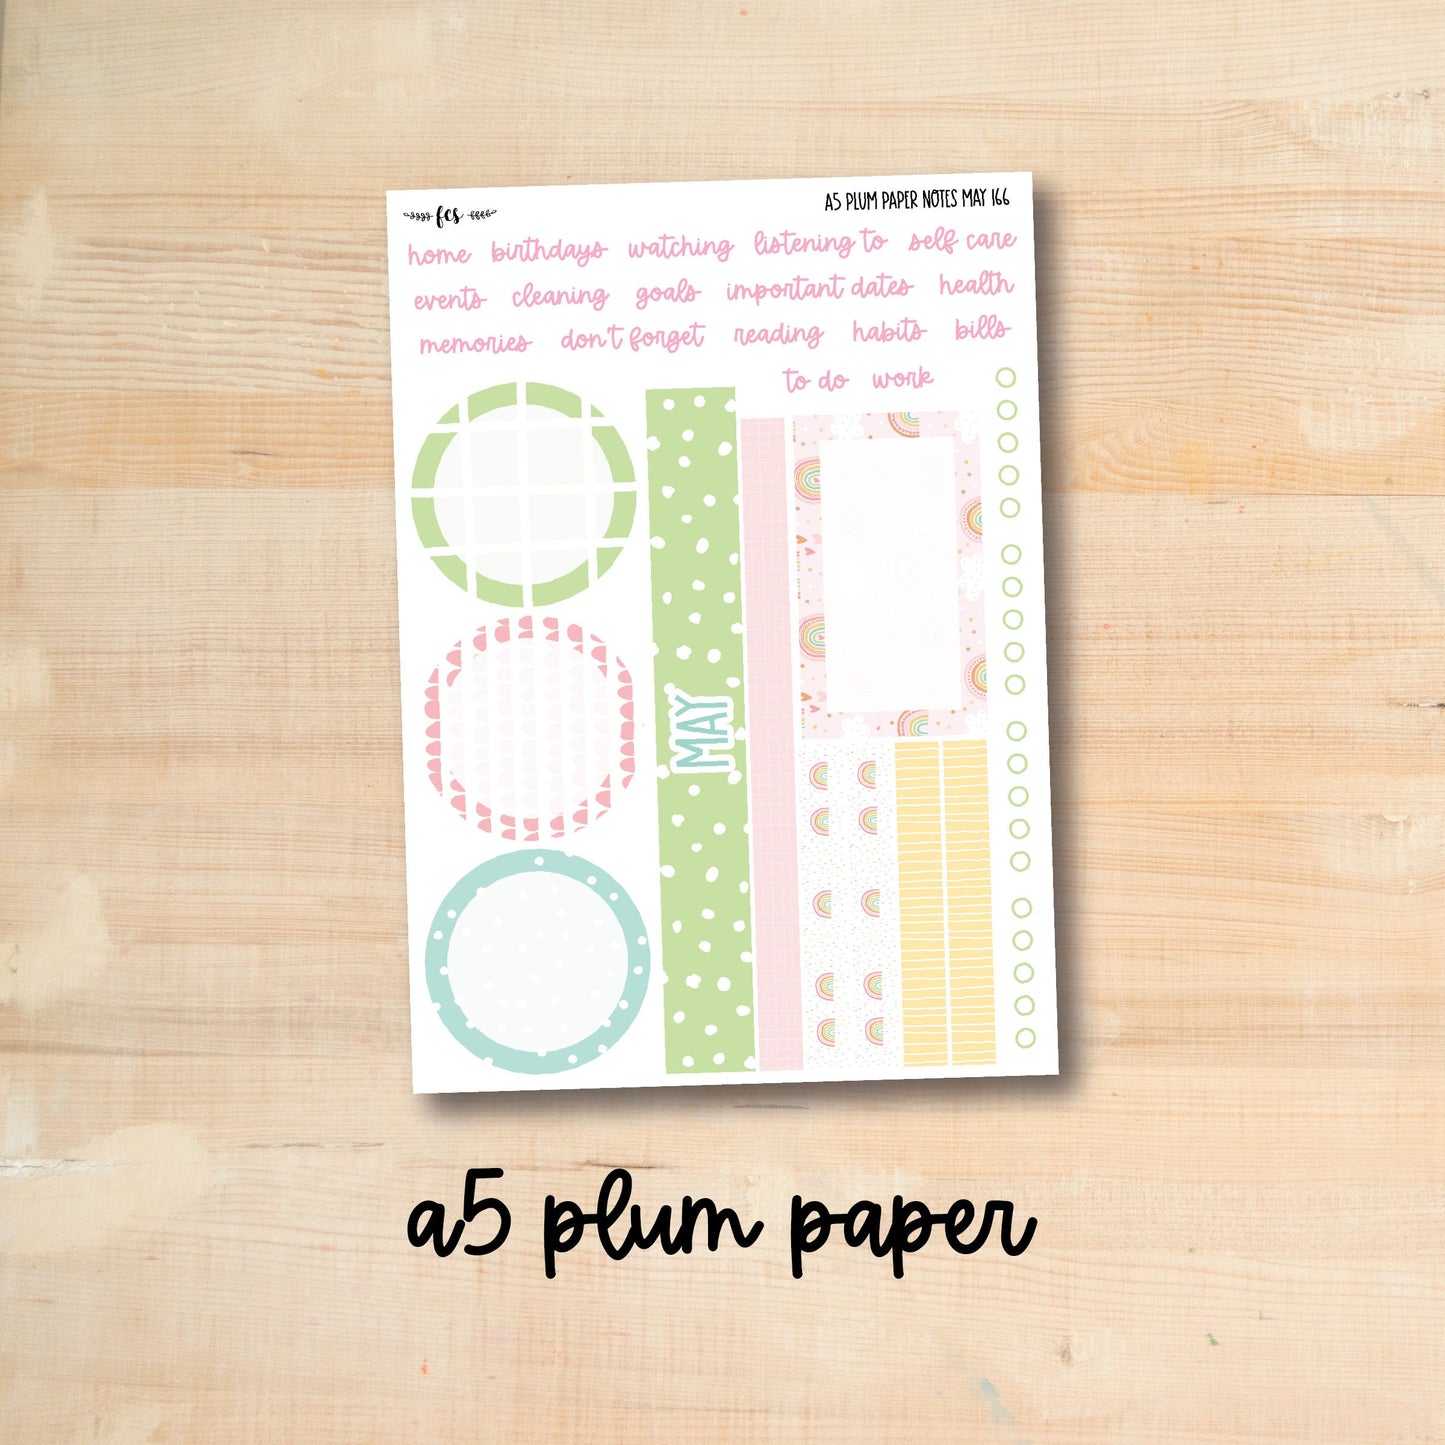 A5 Plum NOTES-MAY166 || SUNNY SKIES A5 Plum Paper May notes page